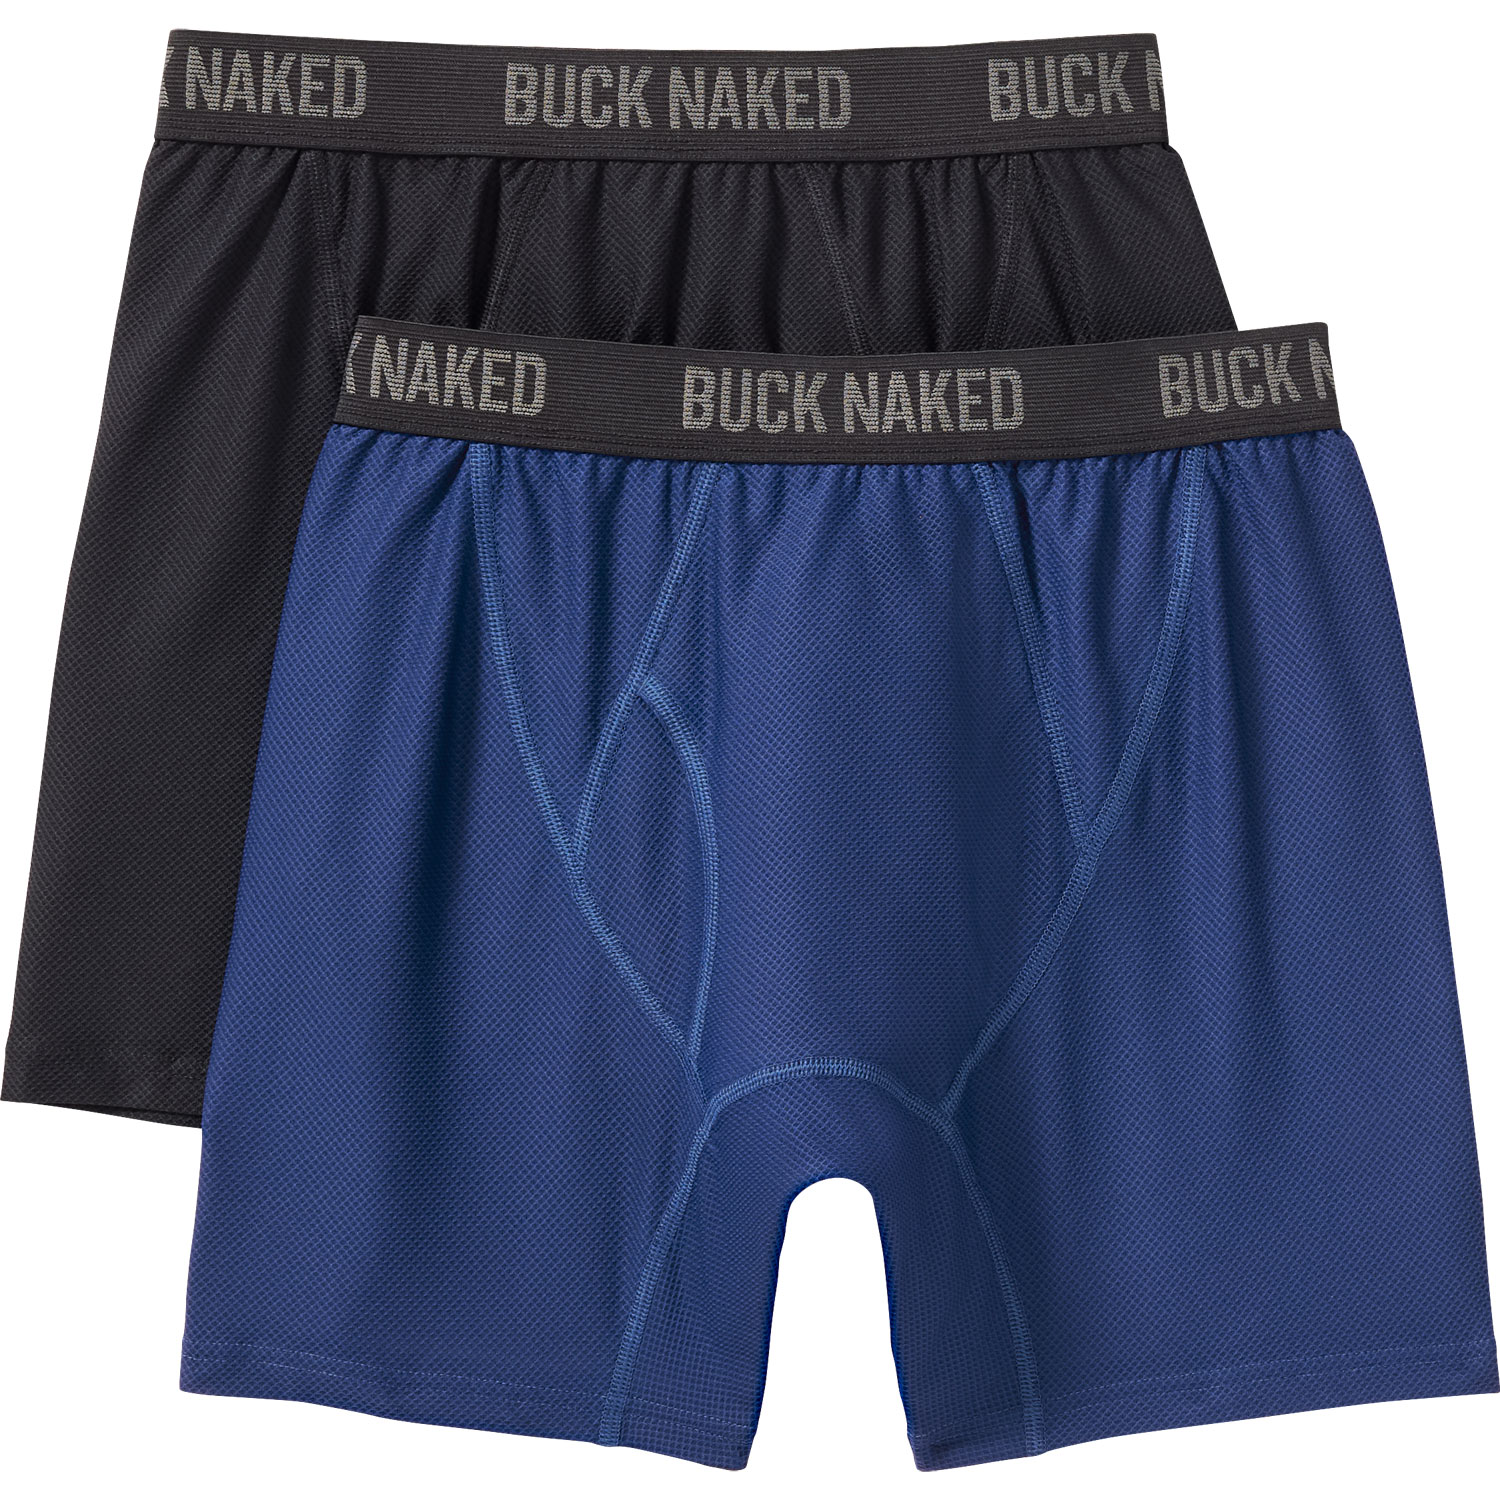 Men's Buck Naked Boxer Briefs 2-Pack | Duluth Trading Company